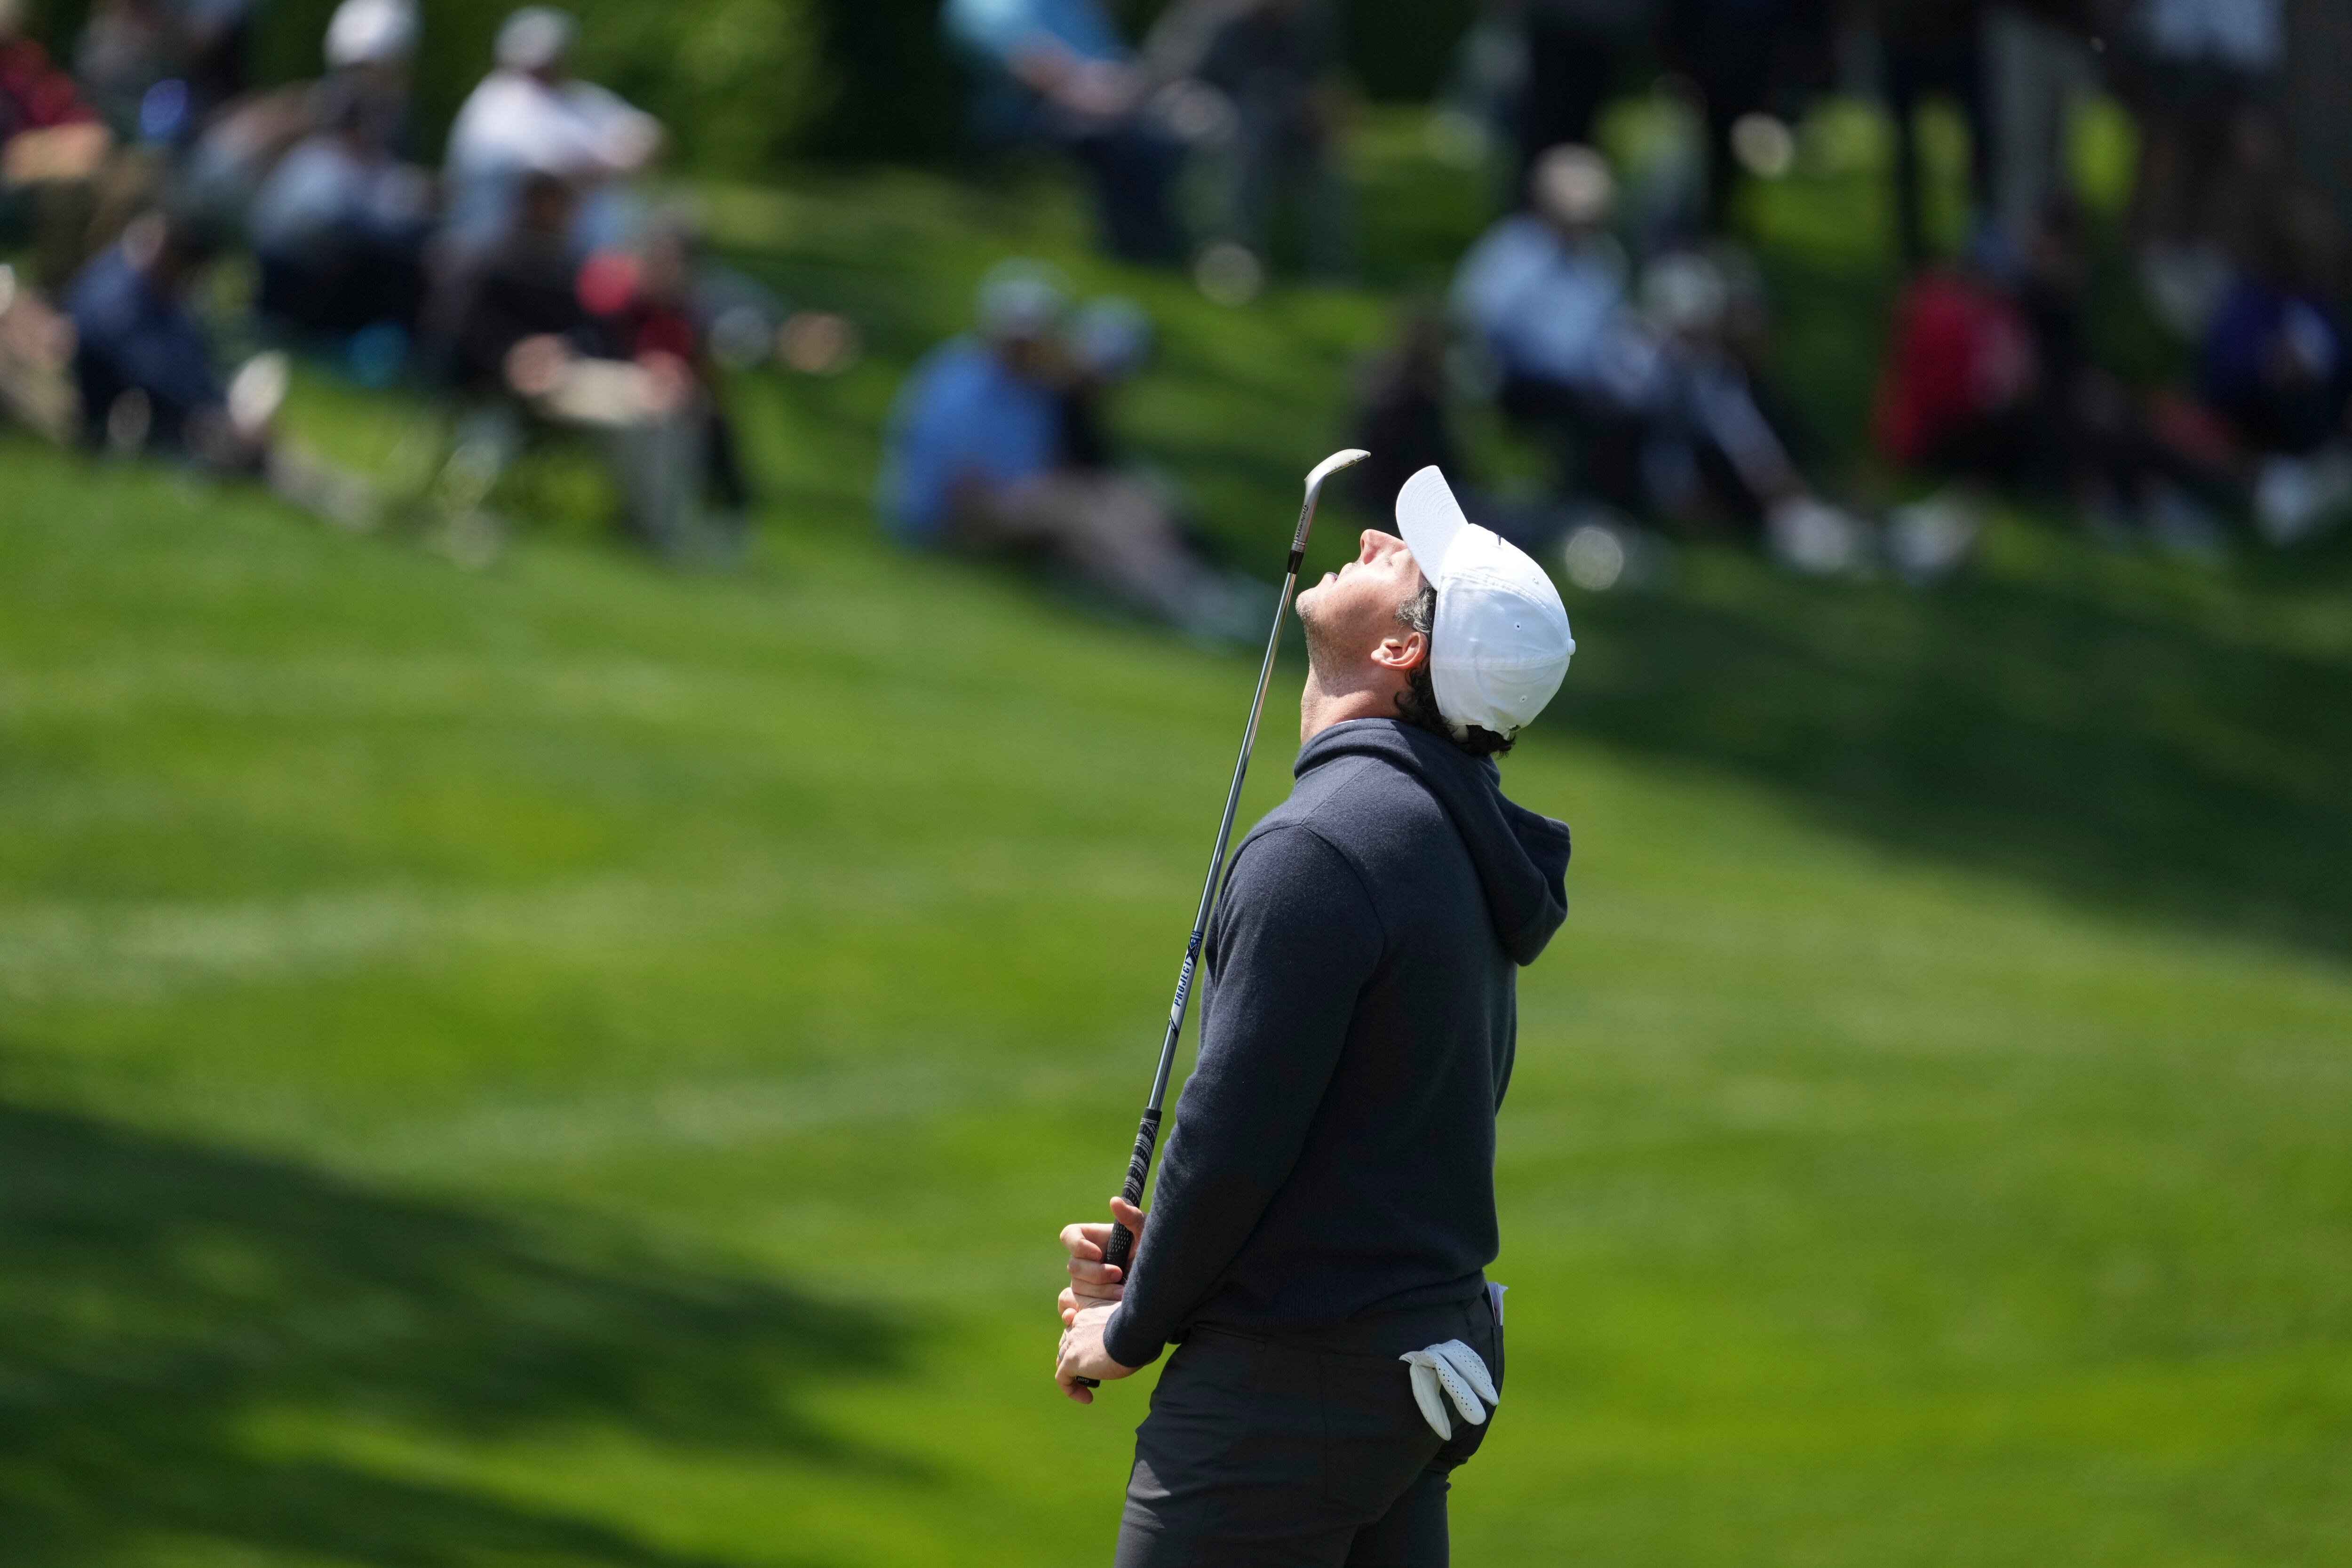 (Desiree Rios | The New York Times) Rory McIlroy reacts after missing a shot on the 2nd hole during the first round of the 2023 PGA Championship at Oak Hill Country Club in Rochester, N.Y., May 18, 2023. Birdies were at a premium for many of the 156 golfers vying for the Wanamaker Trophy at Oak Hill Country Club during the first round of the major tournament on Thursday, May 18, 2023.